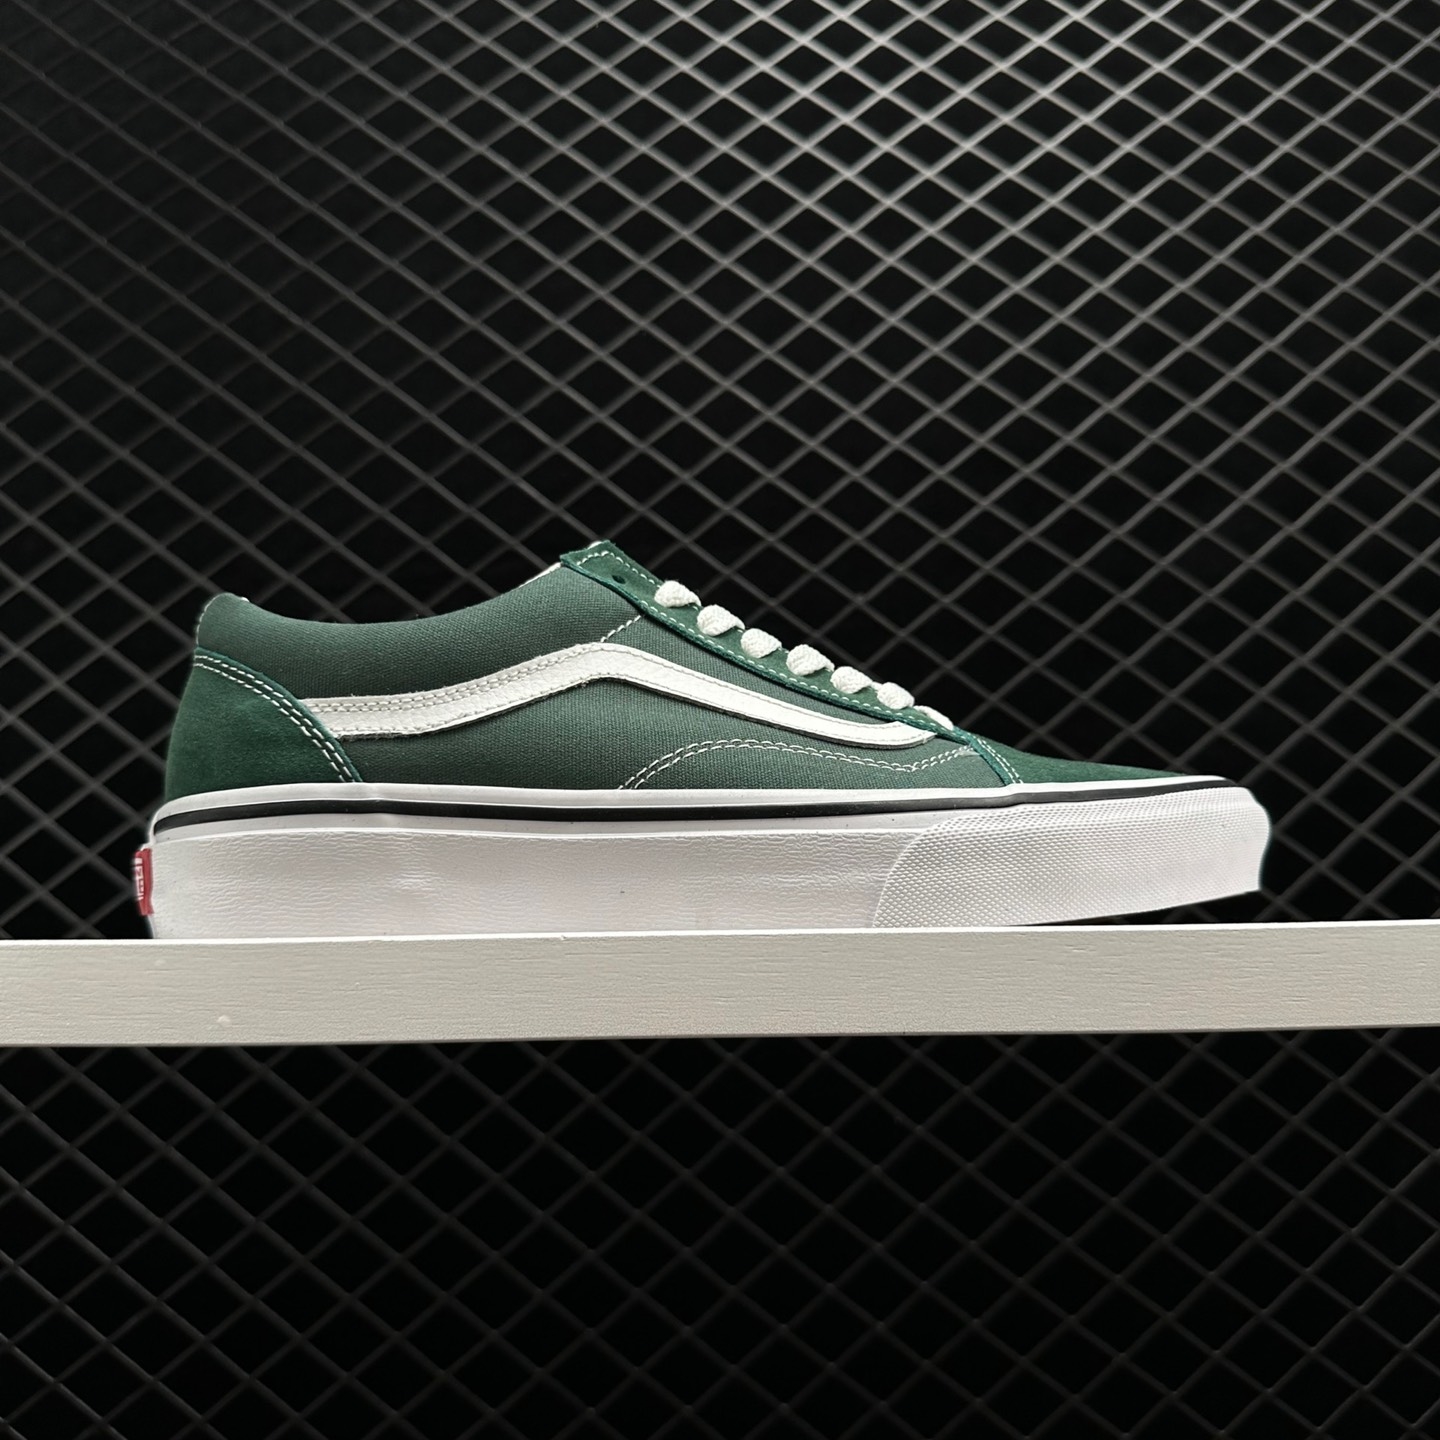 Vans Old Skool 'Color Theory - Duck Green' VN0A5KRSYQW: Trendy Sneaker with Unique Green Hue